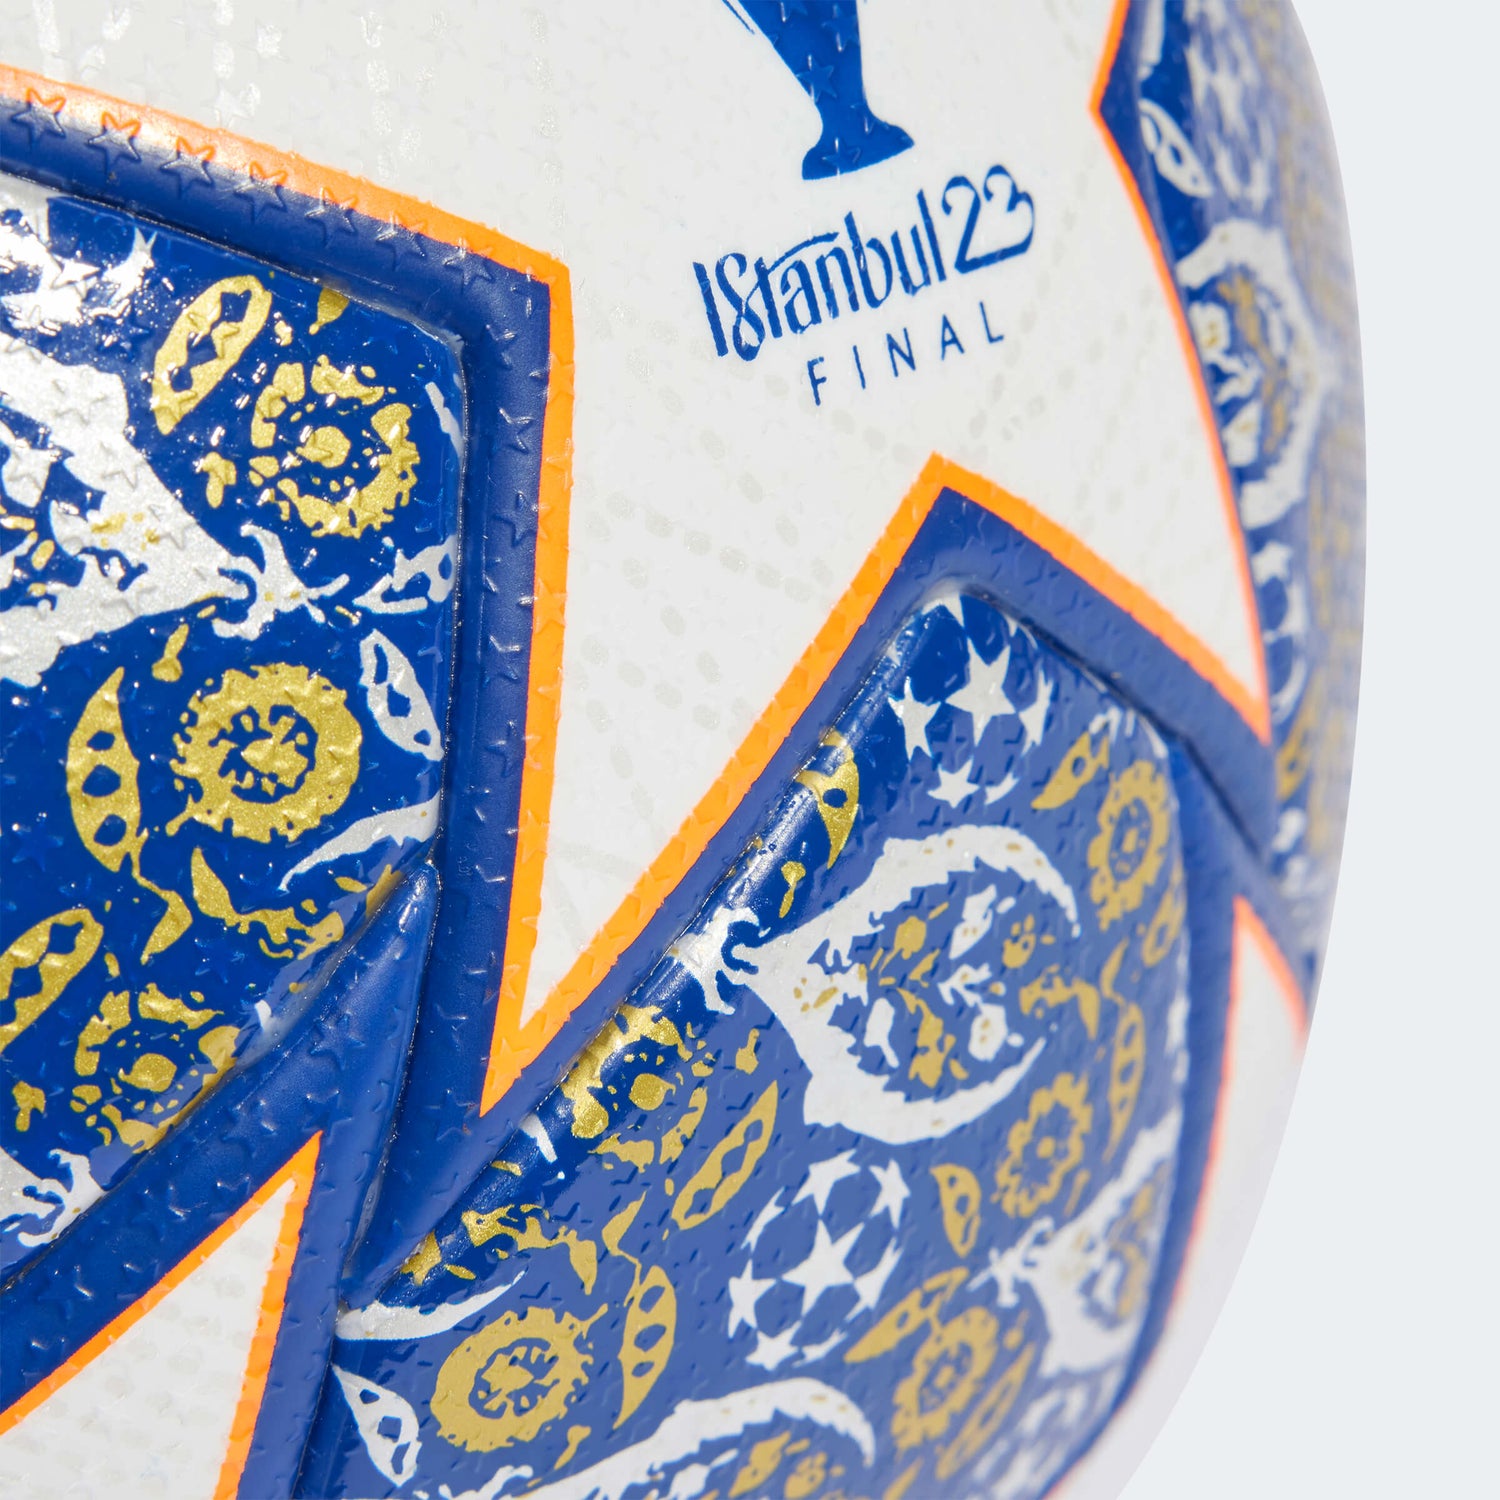 adidas Istanbul Finale 23 Pro Official Match Ball - White-Royal Blue-Solar Orange (Detail 2)